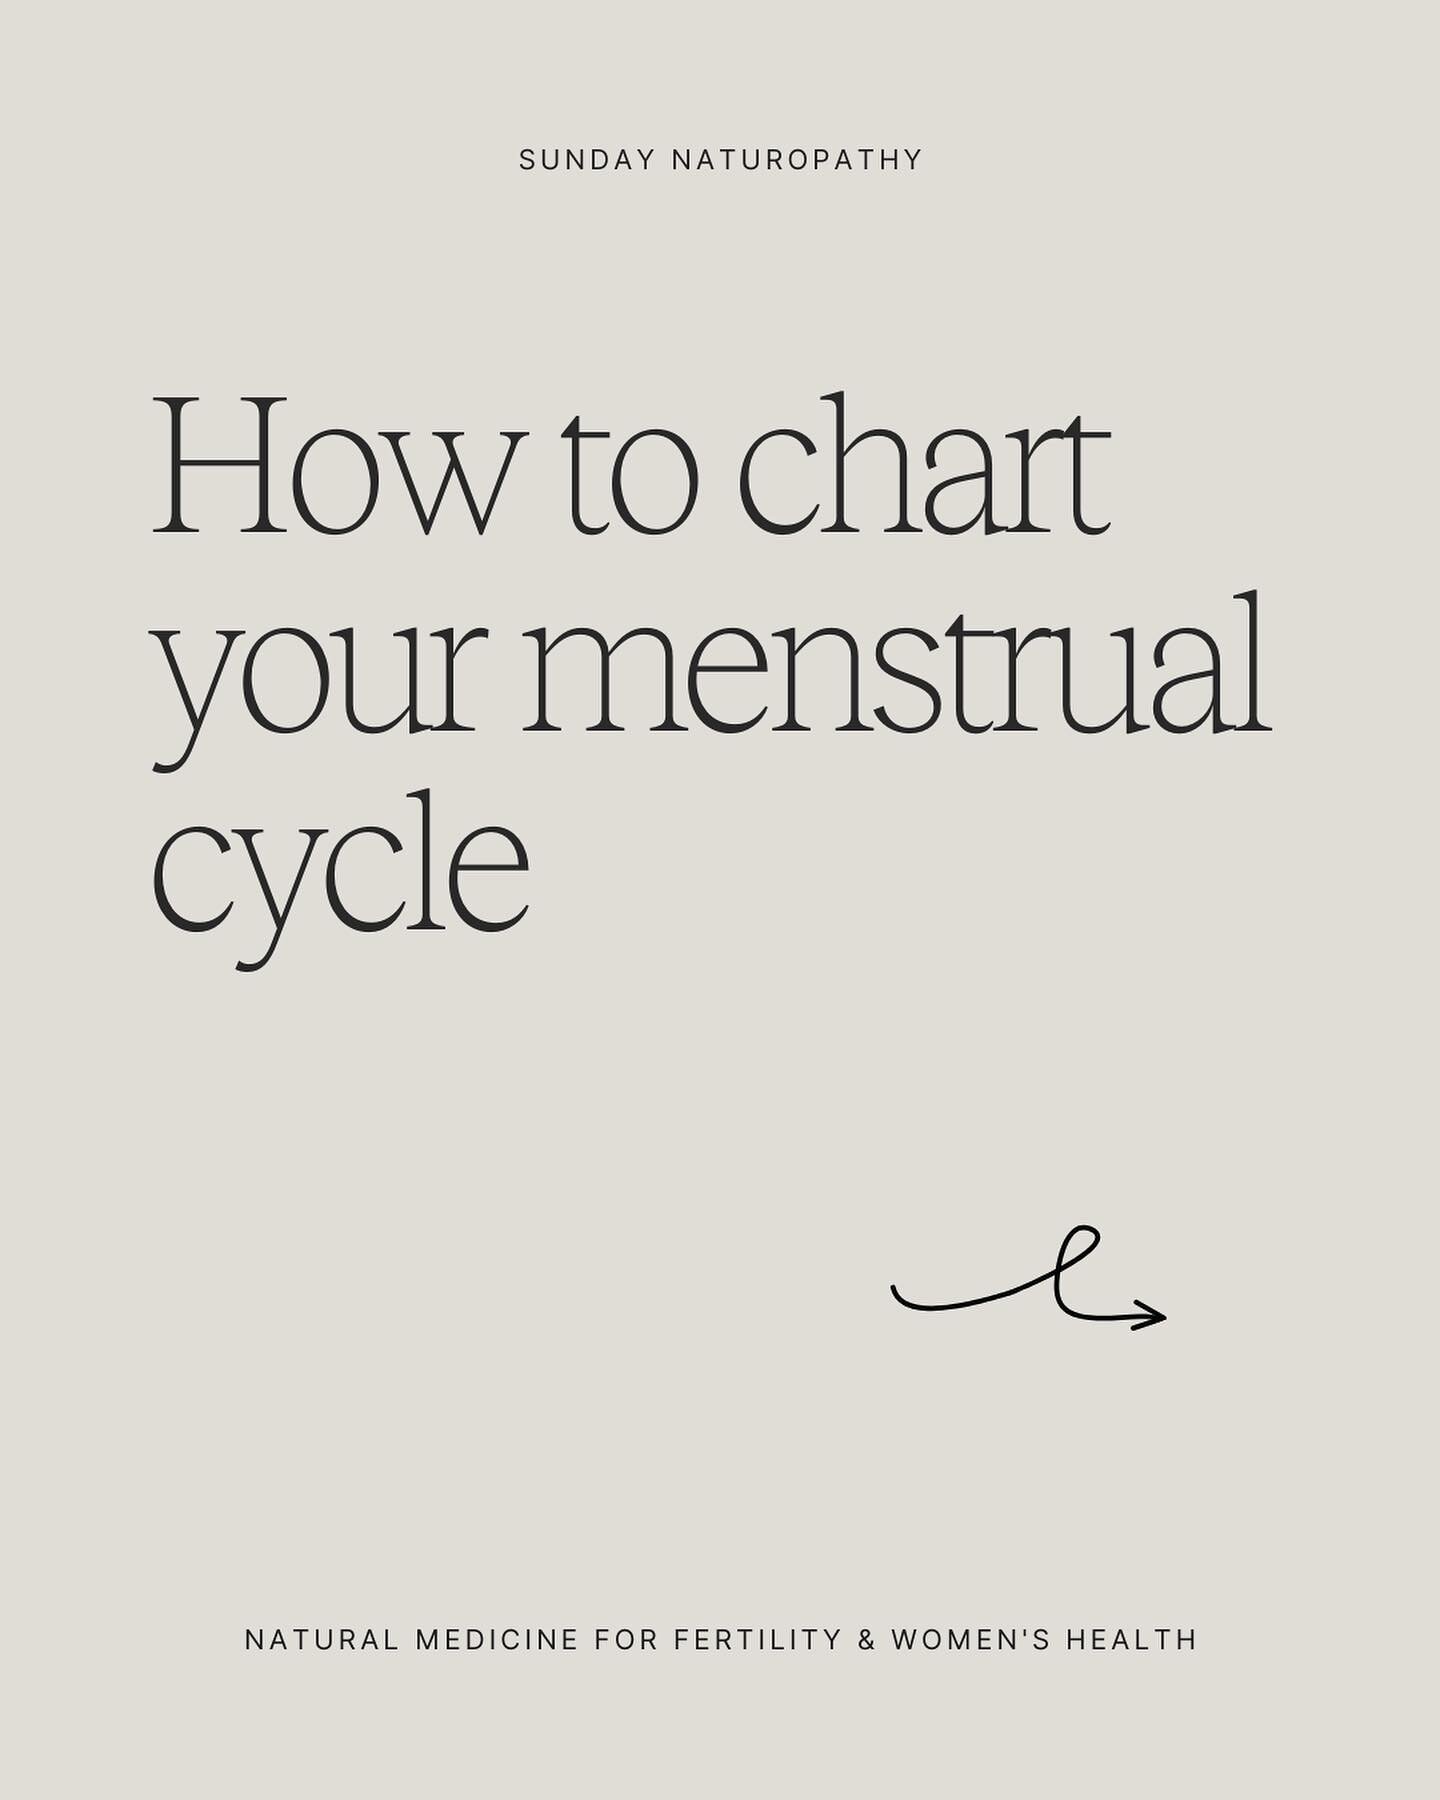 Menstrual cycle charting is my favourite 5-minute health practice. 

Trying to conceive? Trying to AVOID conceiving? Just health conscious? Charting is an incredible tool to help you on your journey. 

In this carousel, I go through:

🤎 The benefits